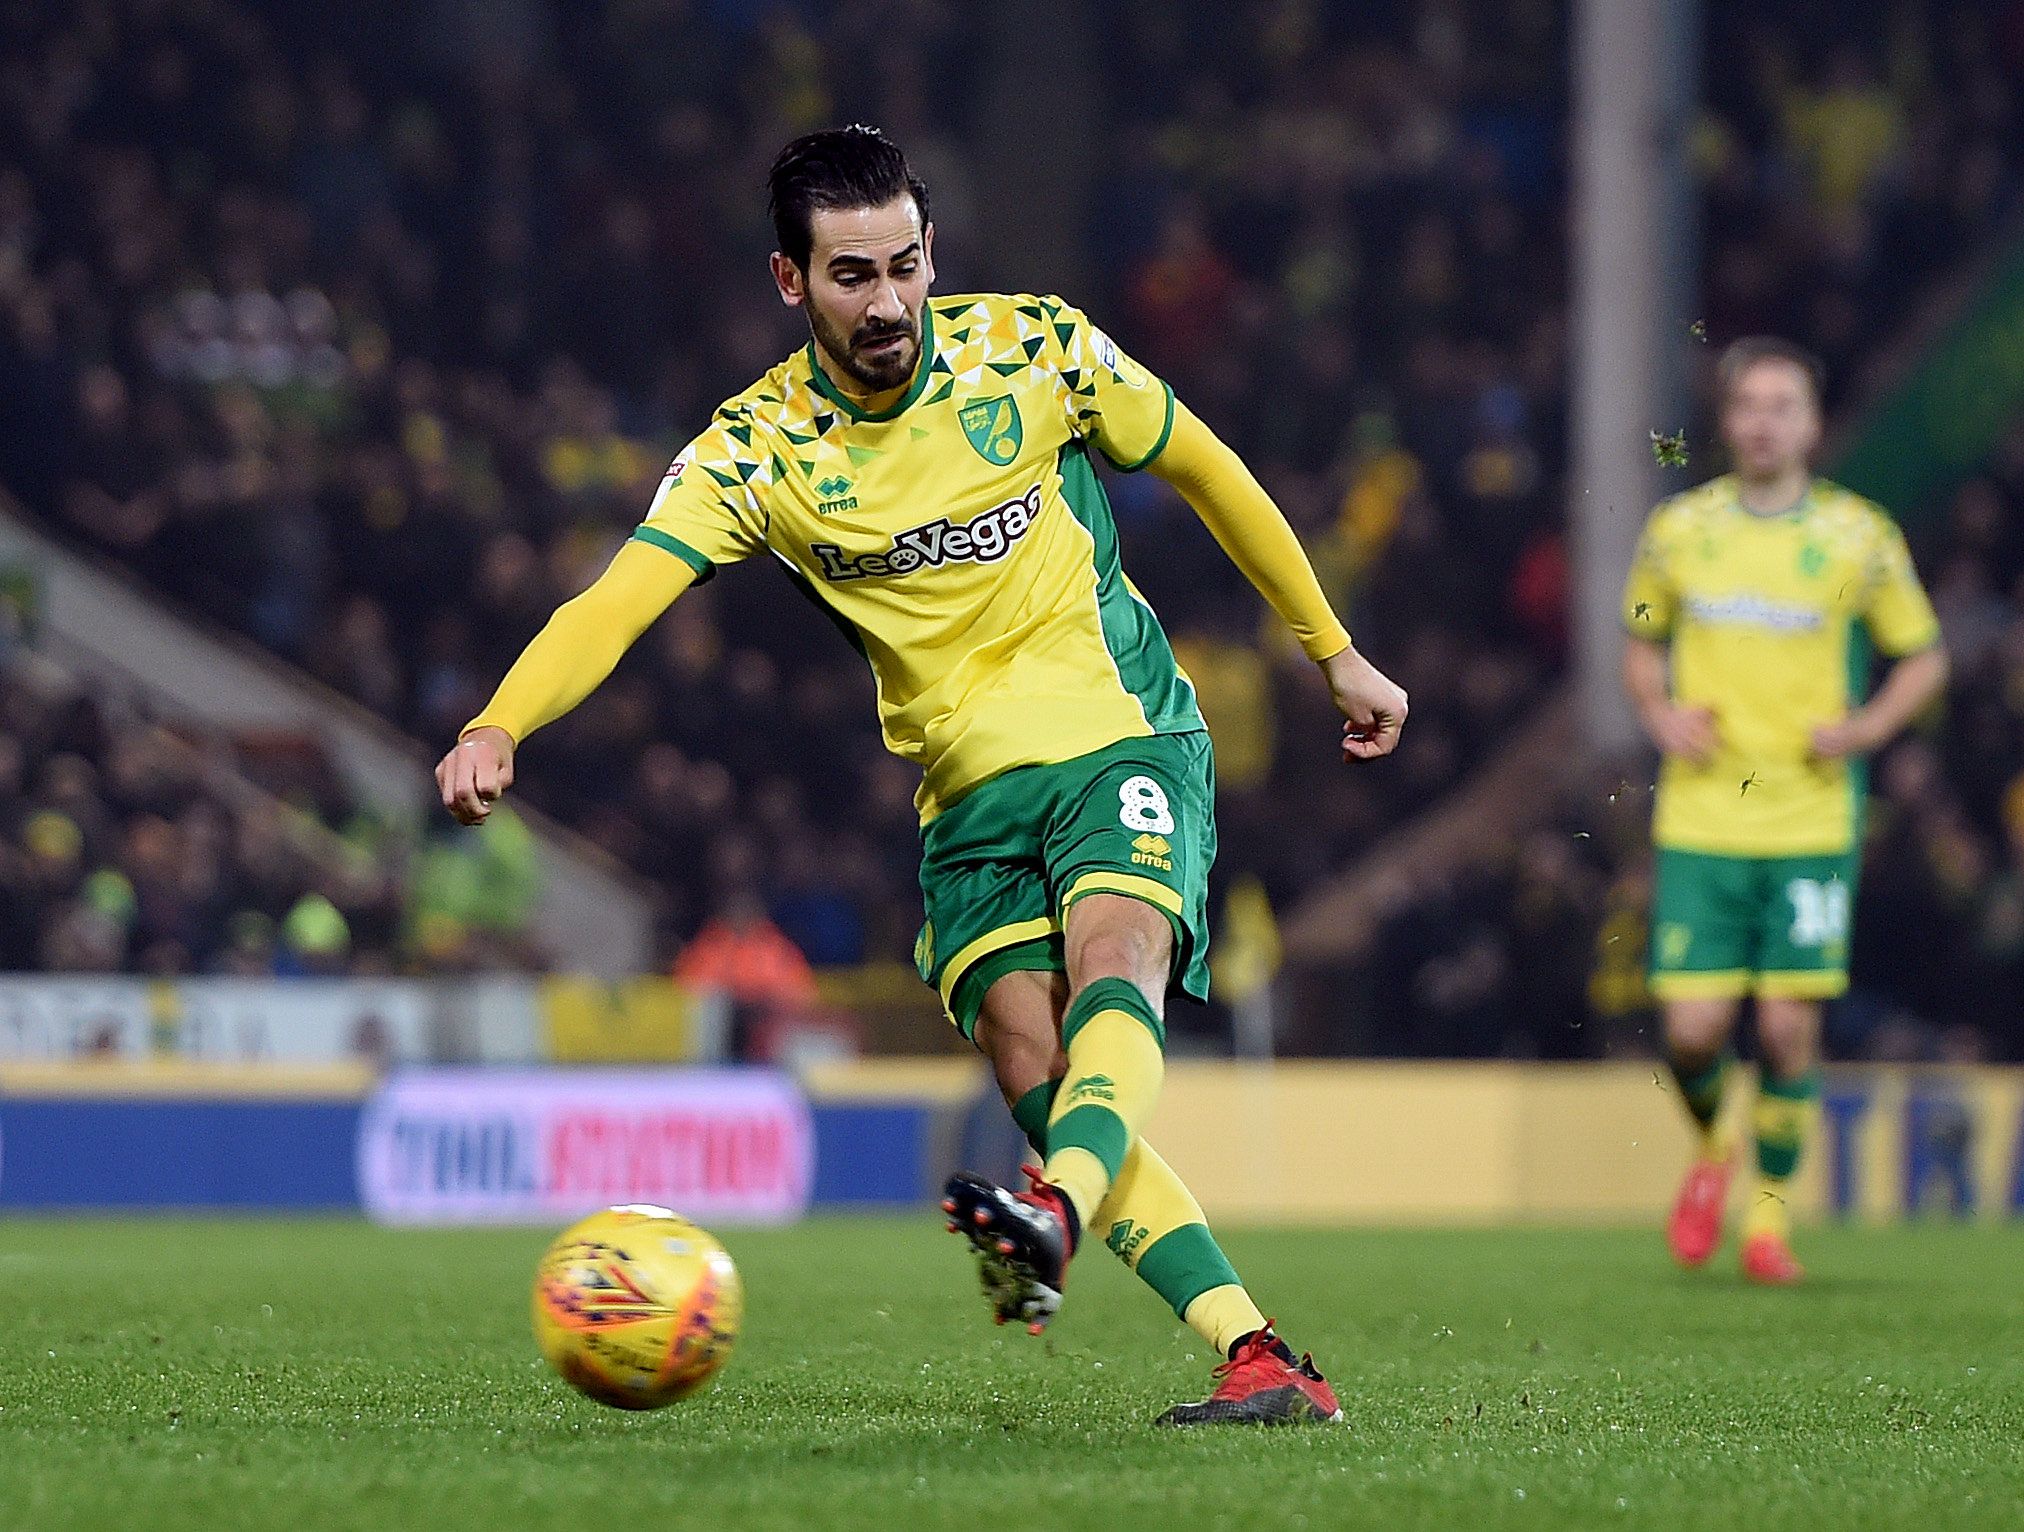 Soccer Football - Championship - Norwich City v Nottingham Forest - Carrow Road, Norwich, Britain - December 26, 2018  Norwich's Mario Vrancic scores their first goal   Action Images/Alan Walter  EDITORIAL USE ONLY. No use with unauthorized audio, video, data, fixture lists, club/league logos or 